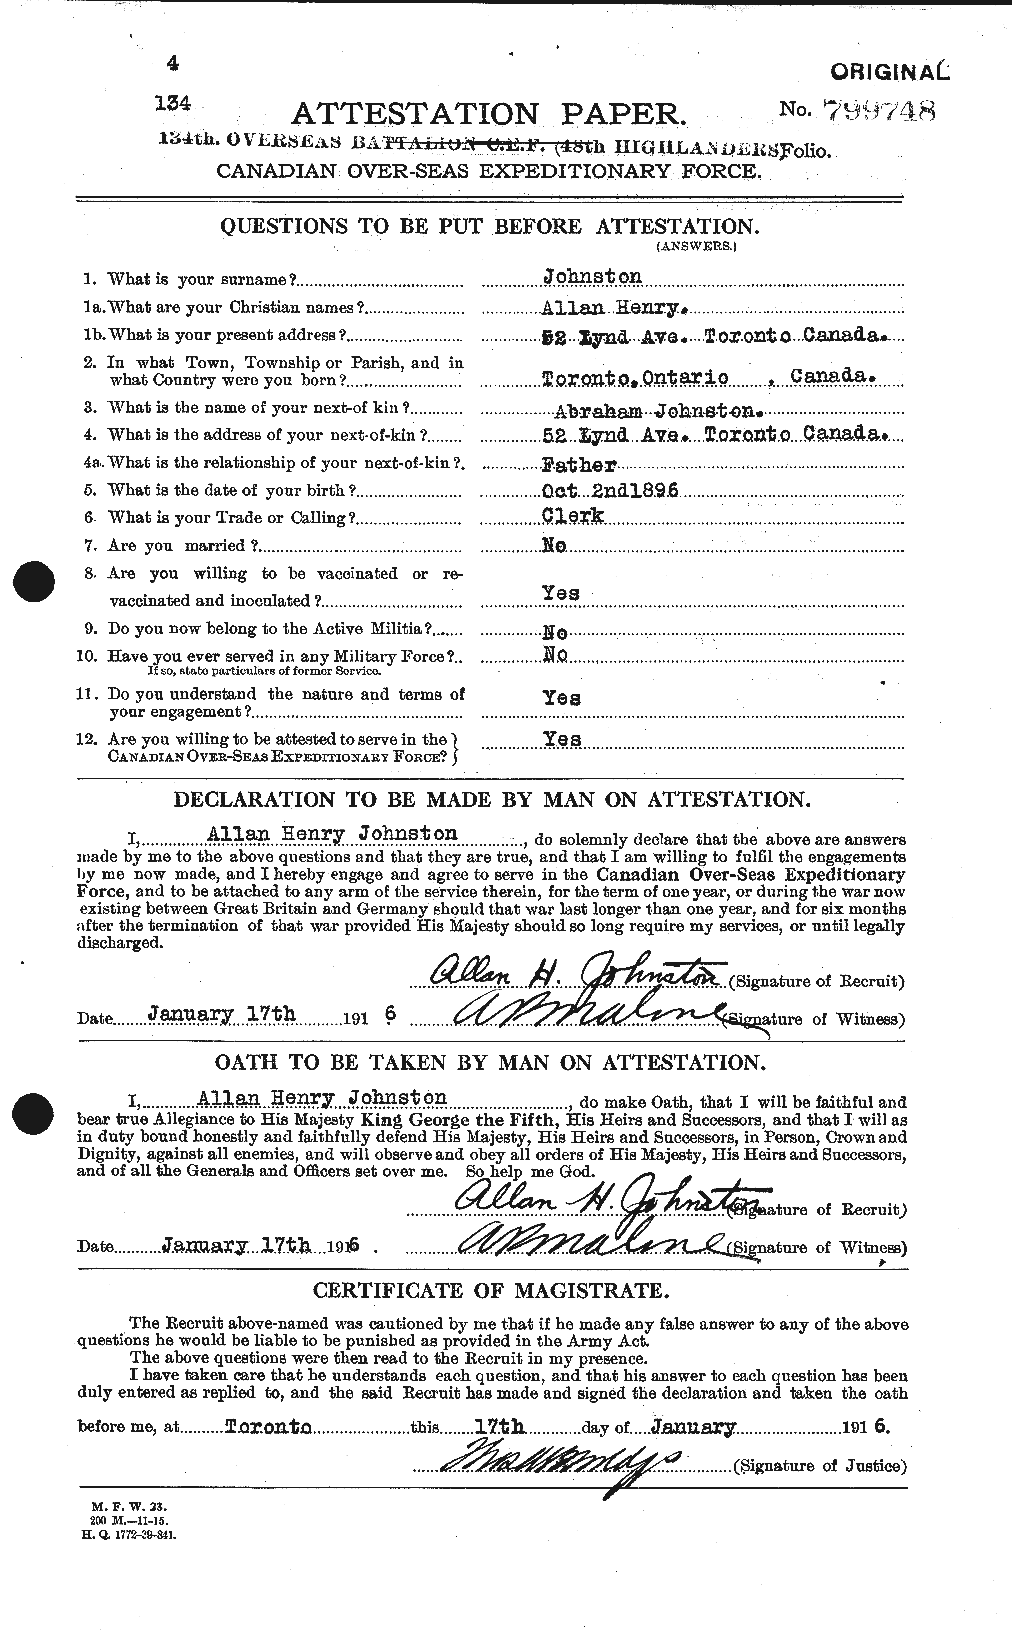 Personnel Records of the First World War - CEF 420999a